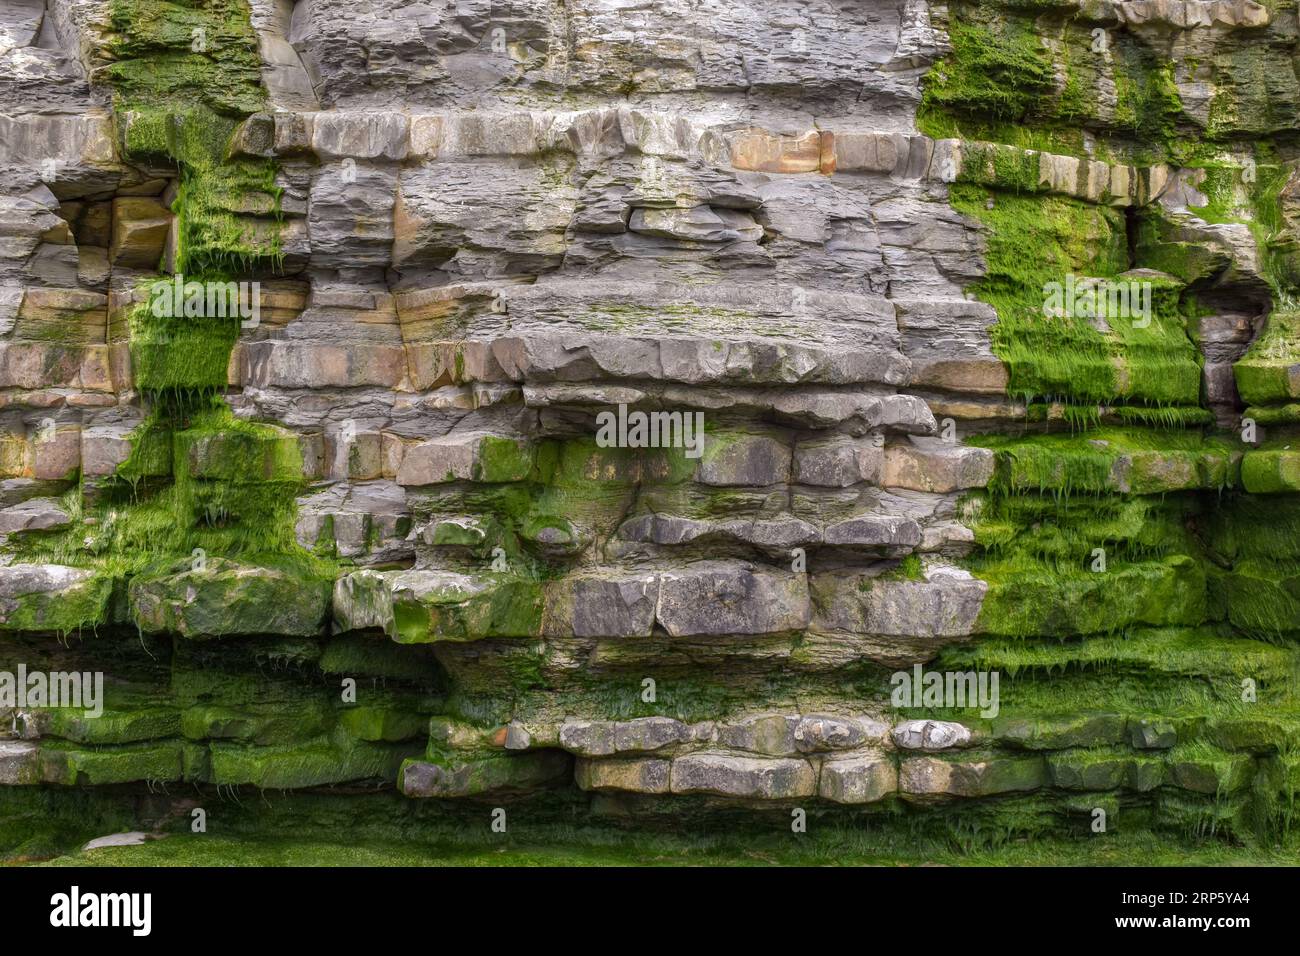 The layers of an eroded cliff face exposed by the weather and sea, with some parts covered in green algae. Stock Photo